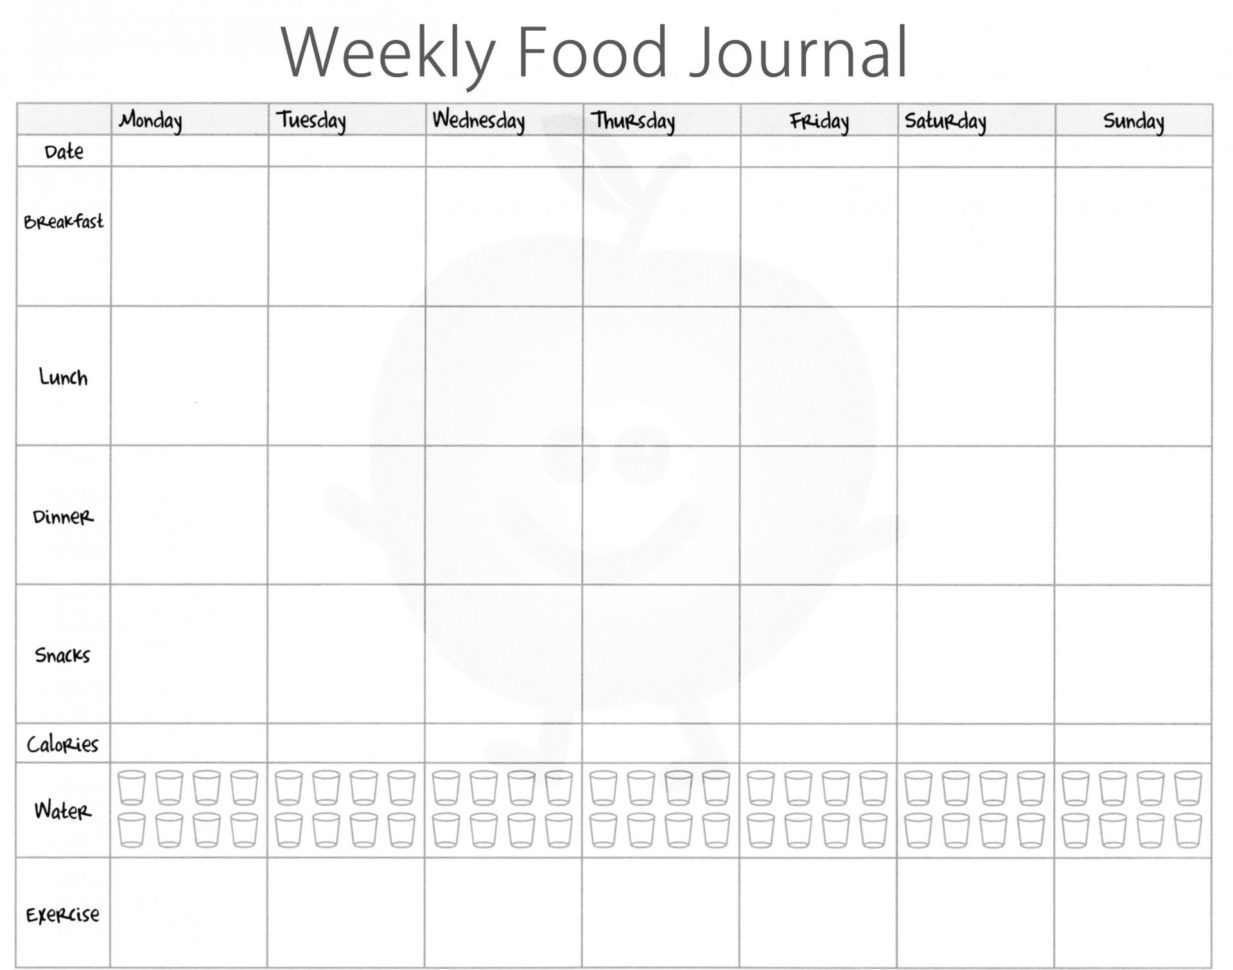 9-best-images-of-printable-food-journal-template-journal-food-diary